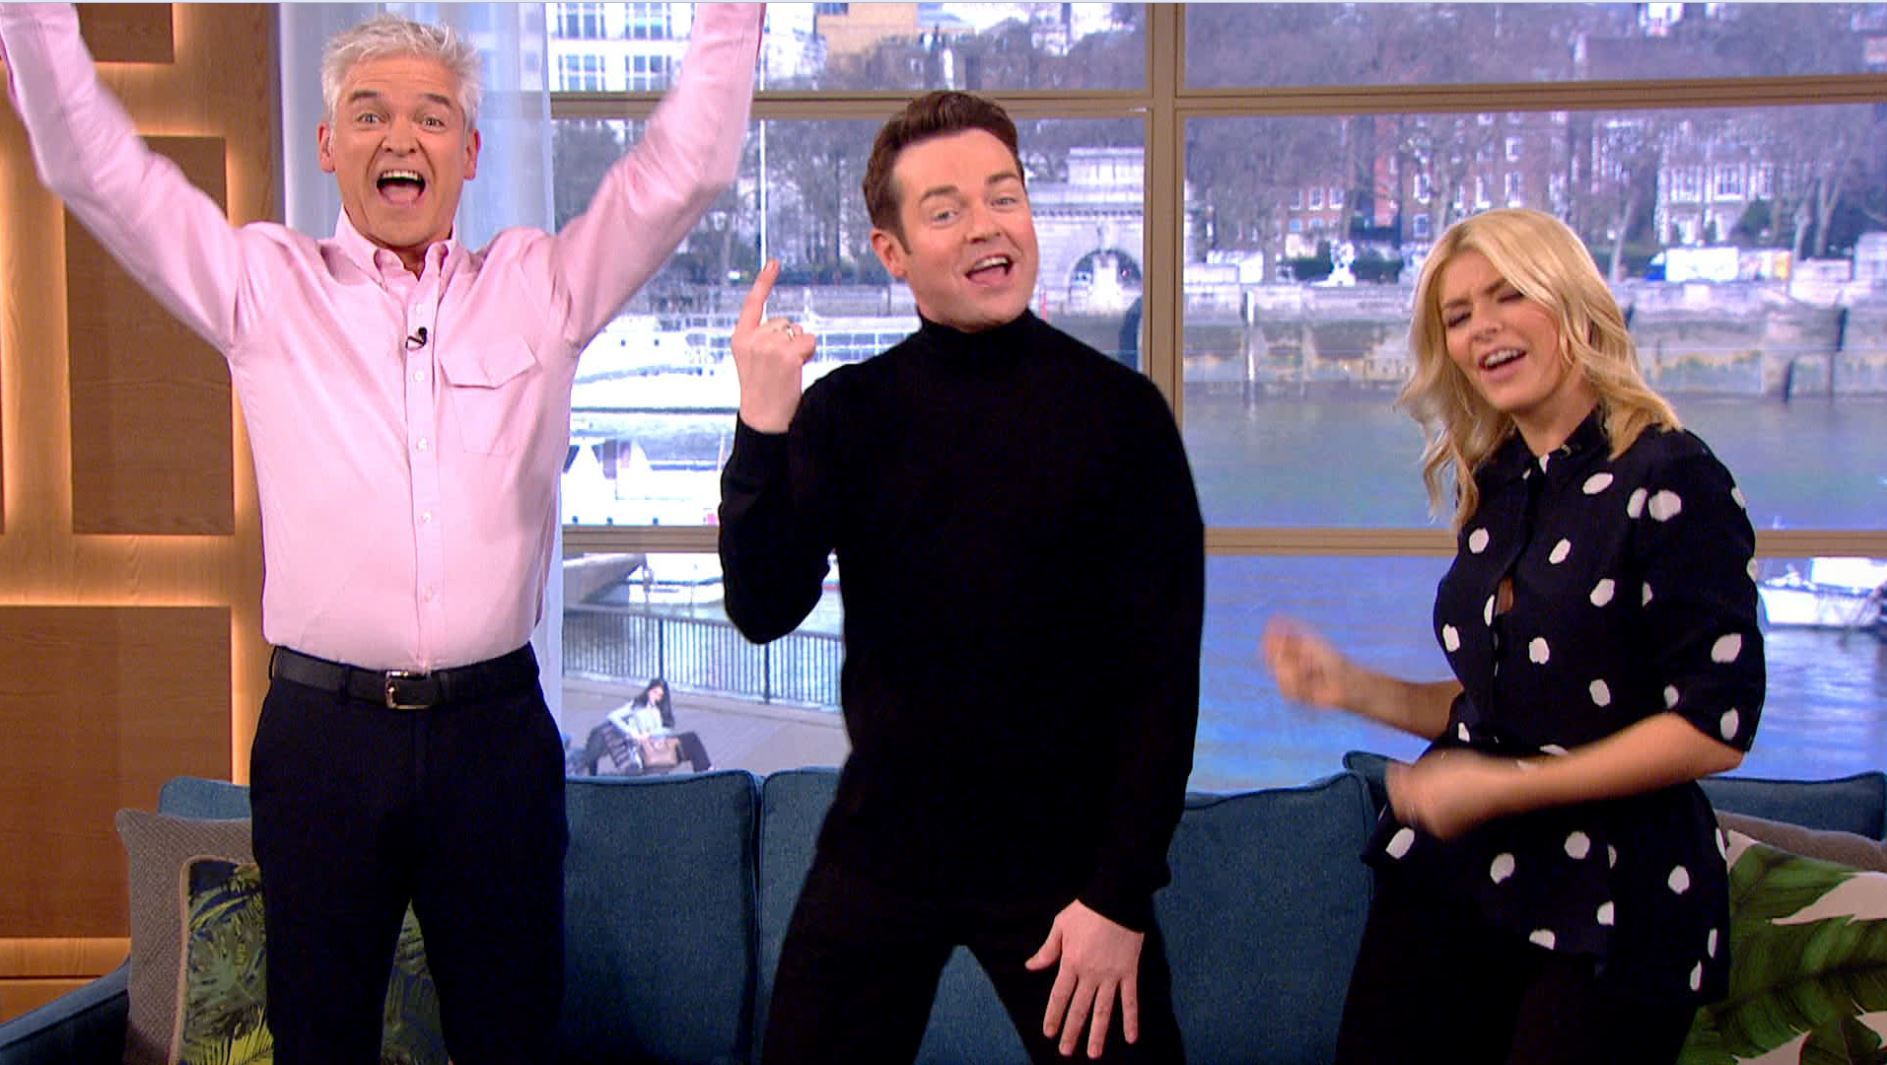 Phillip Schofield and Holly Willoughby surround our friend on the set of This Morning.